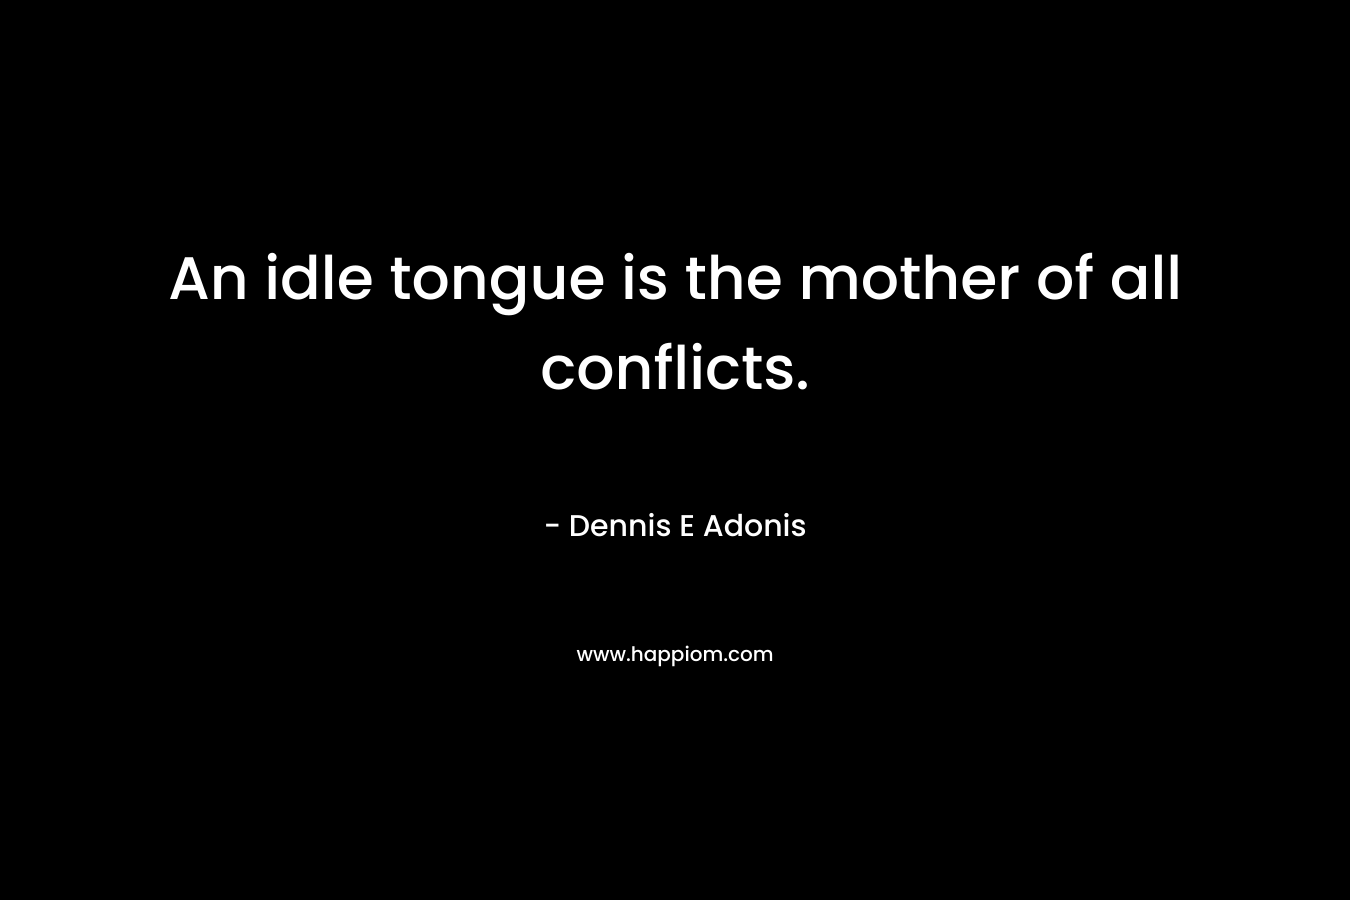 An idle tongue is the mother of all conflicts. – Dennis E Adonis